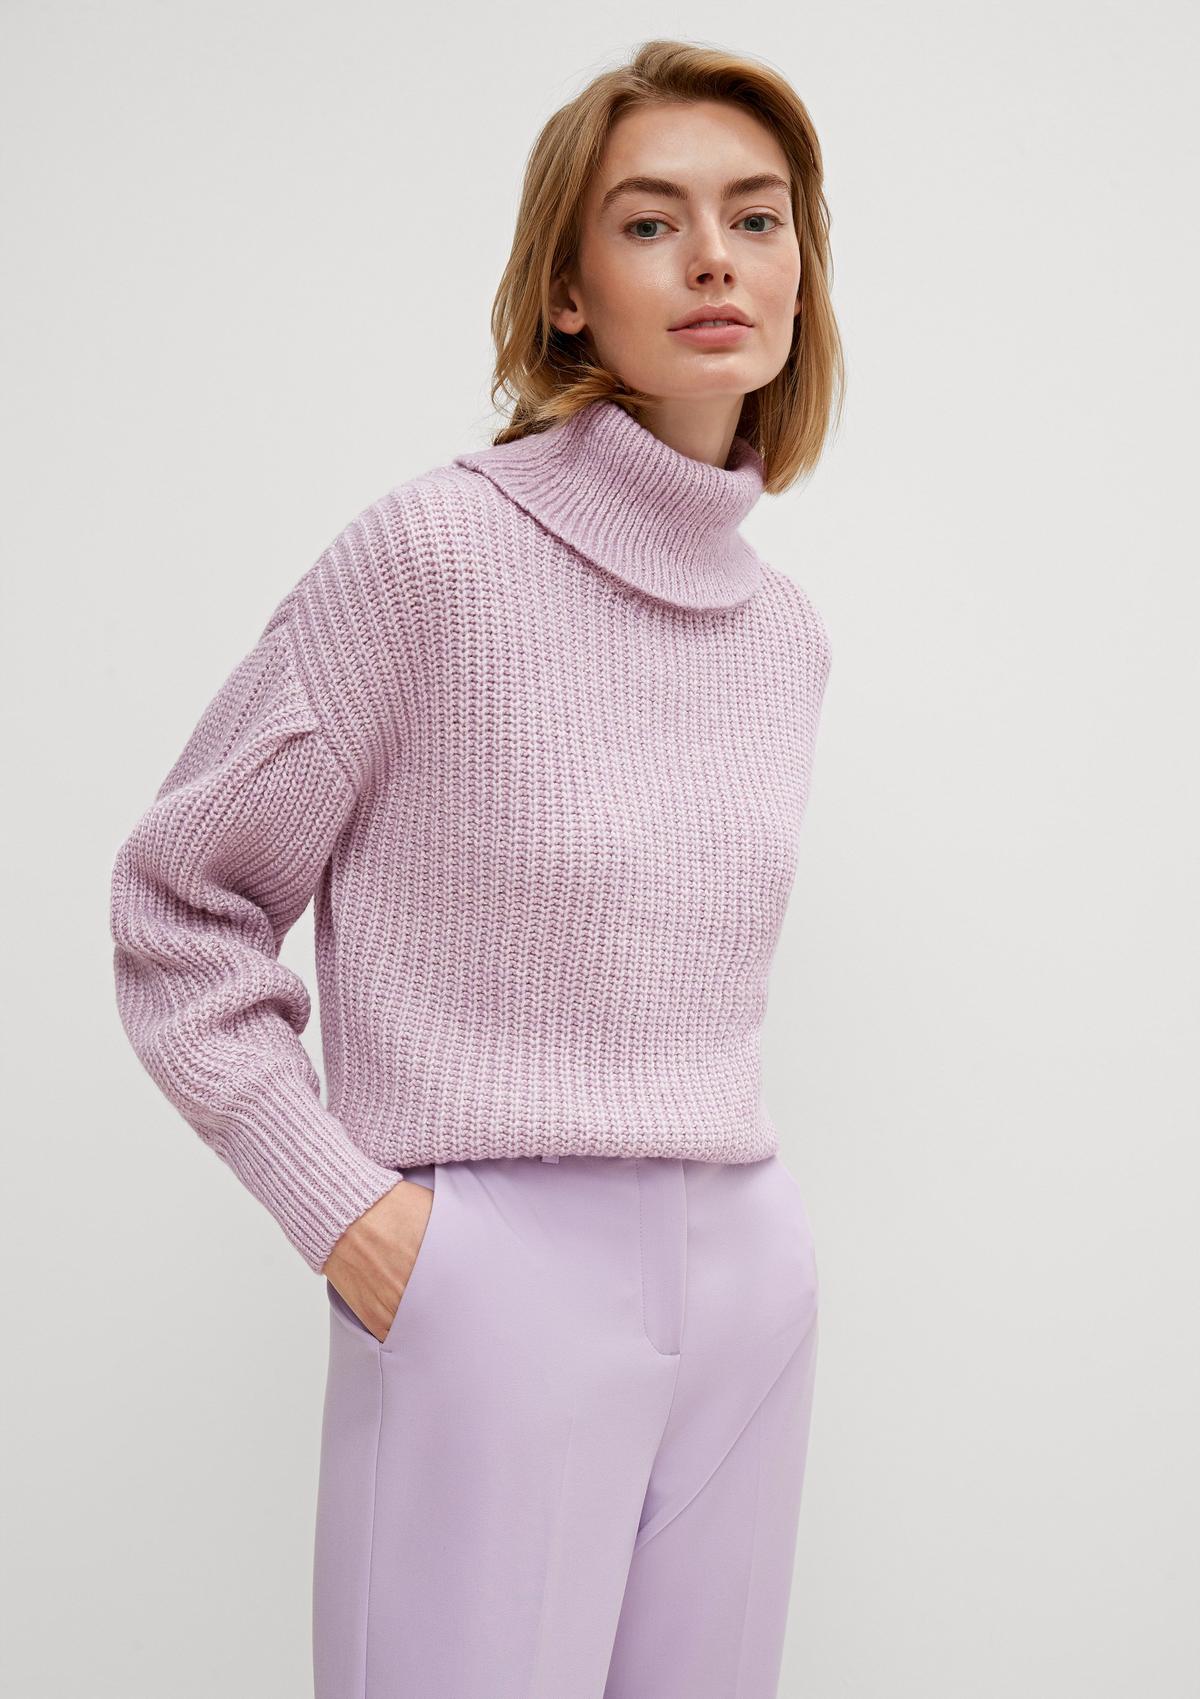 Pull-over en maille à manches bouffantes